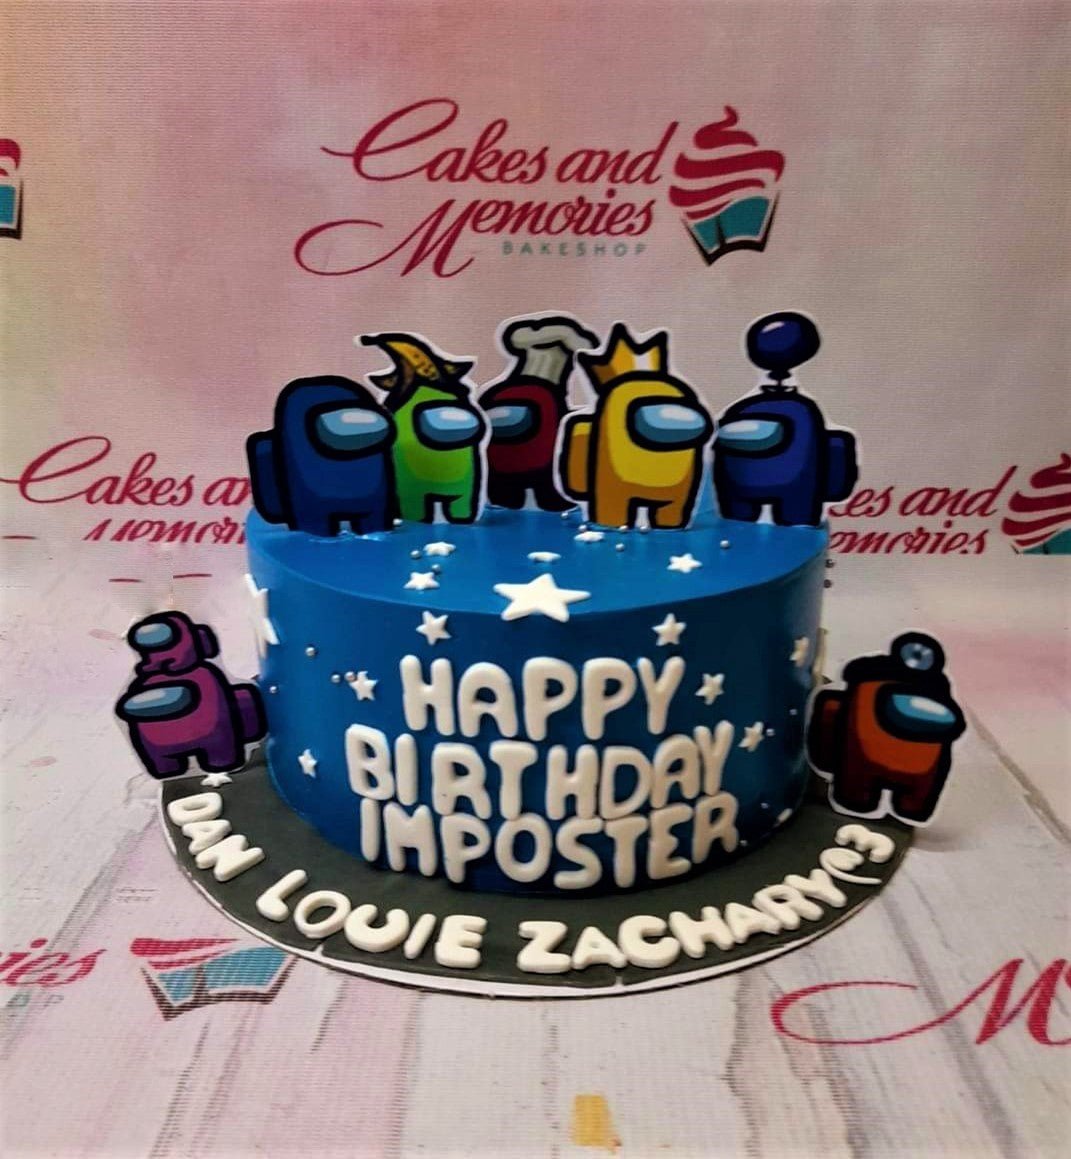 Among us Cake - 1111 – Cakes and Memories Bakeshop